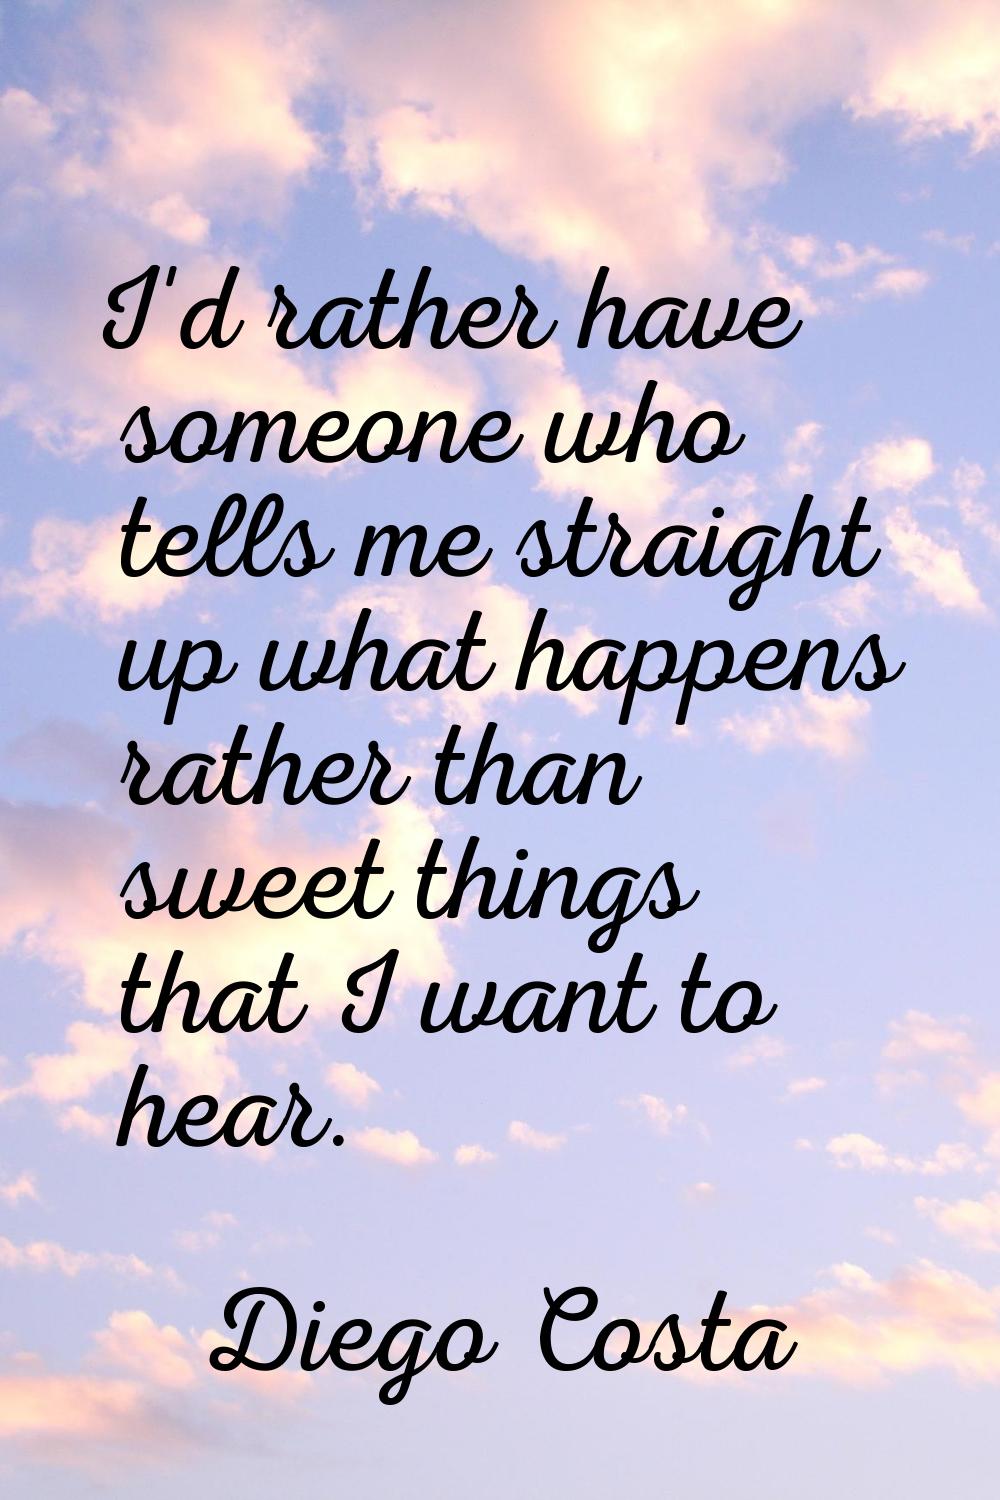 I'd rather have someone who tells me straight up what happens rather than sweet things that I want 